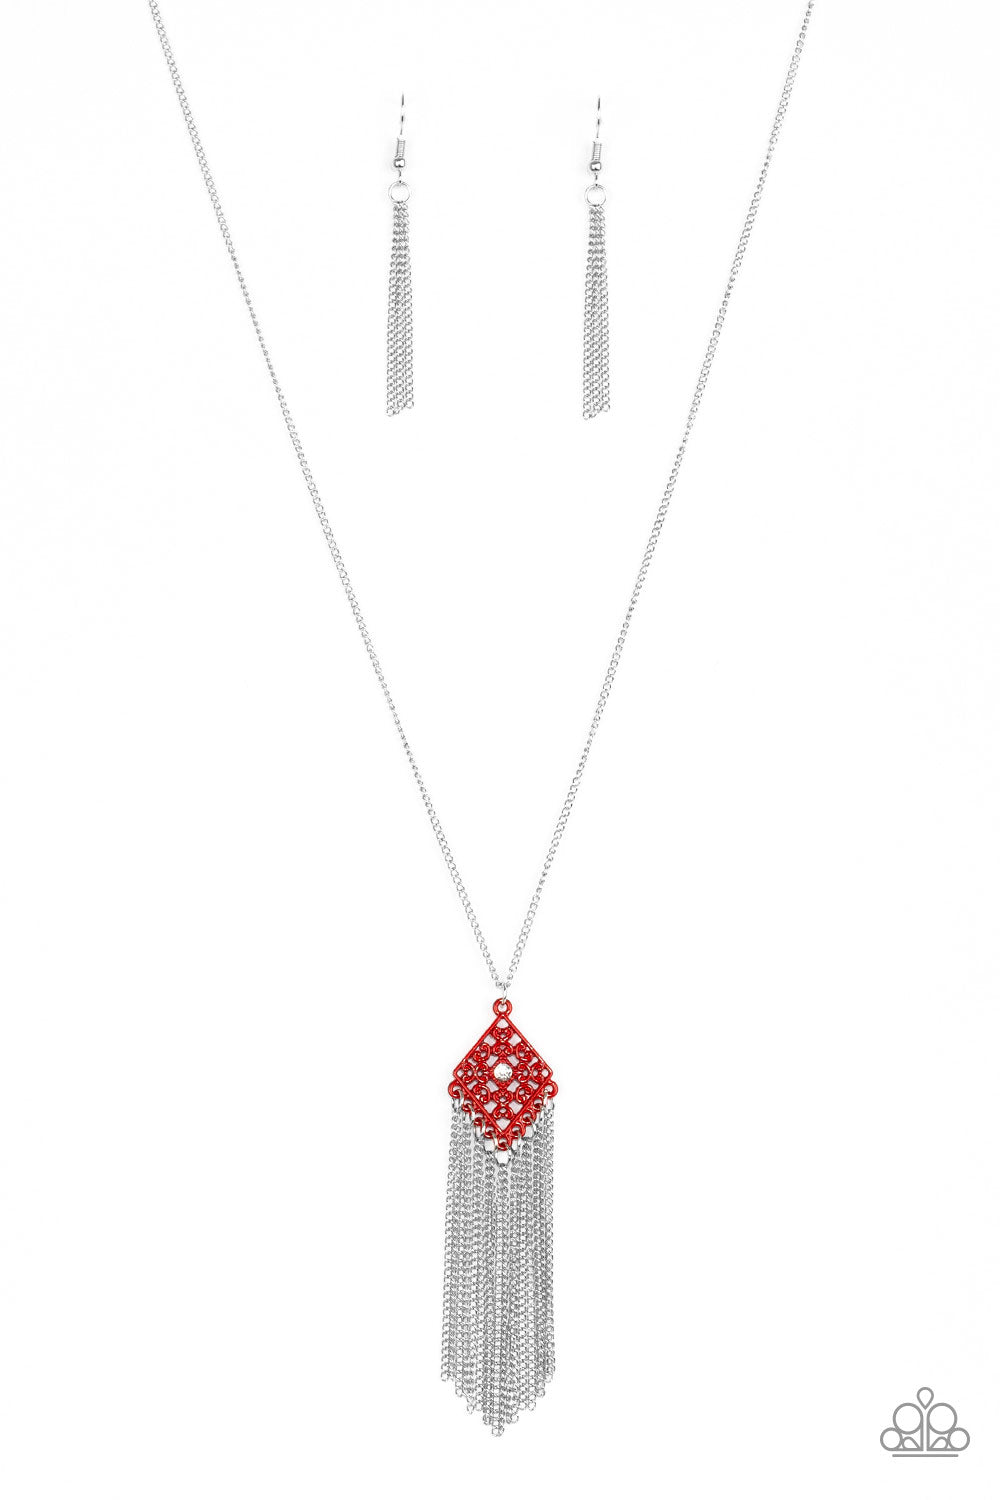 COLOR ME CAPRICIOUS - RED NECKLACE